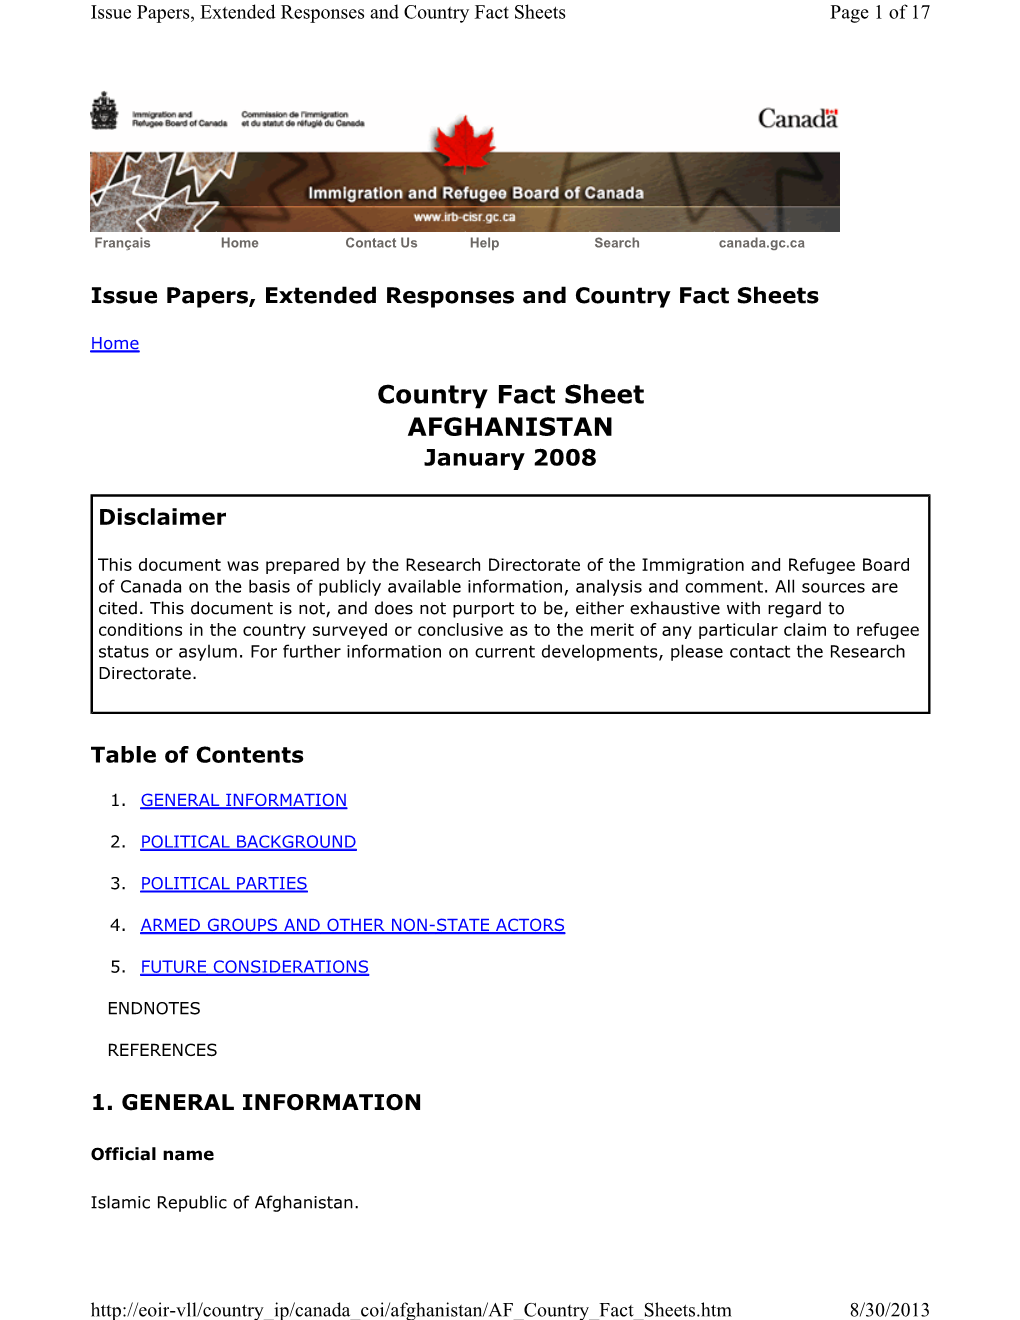 Afghanistan Country Fact Sheet